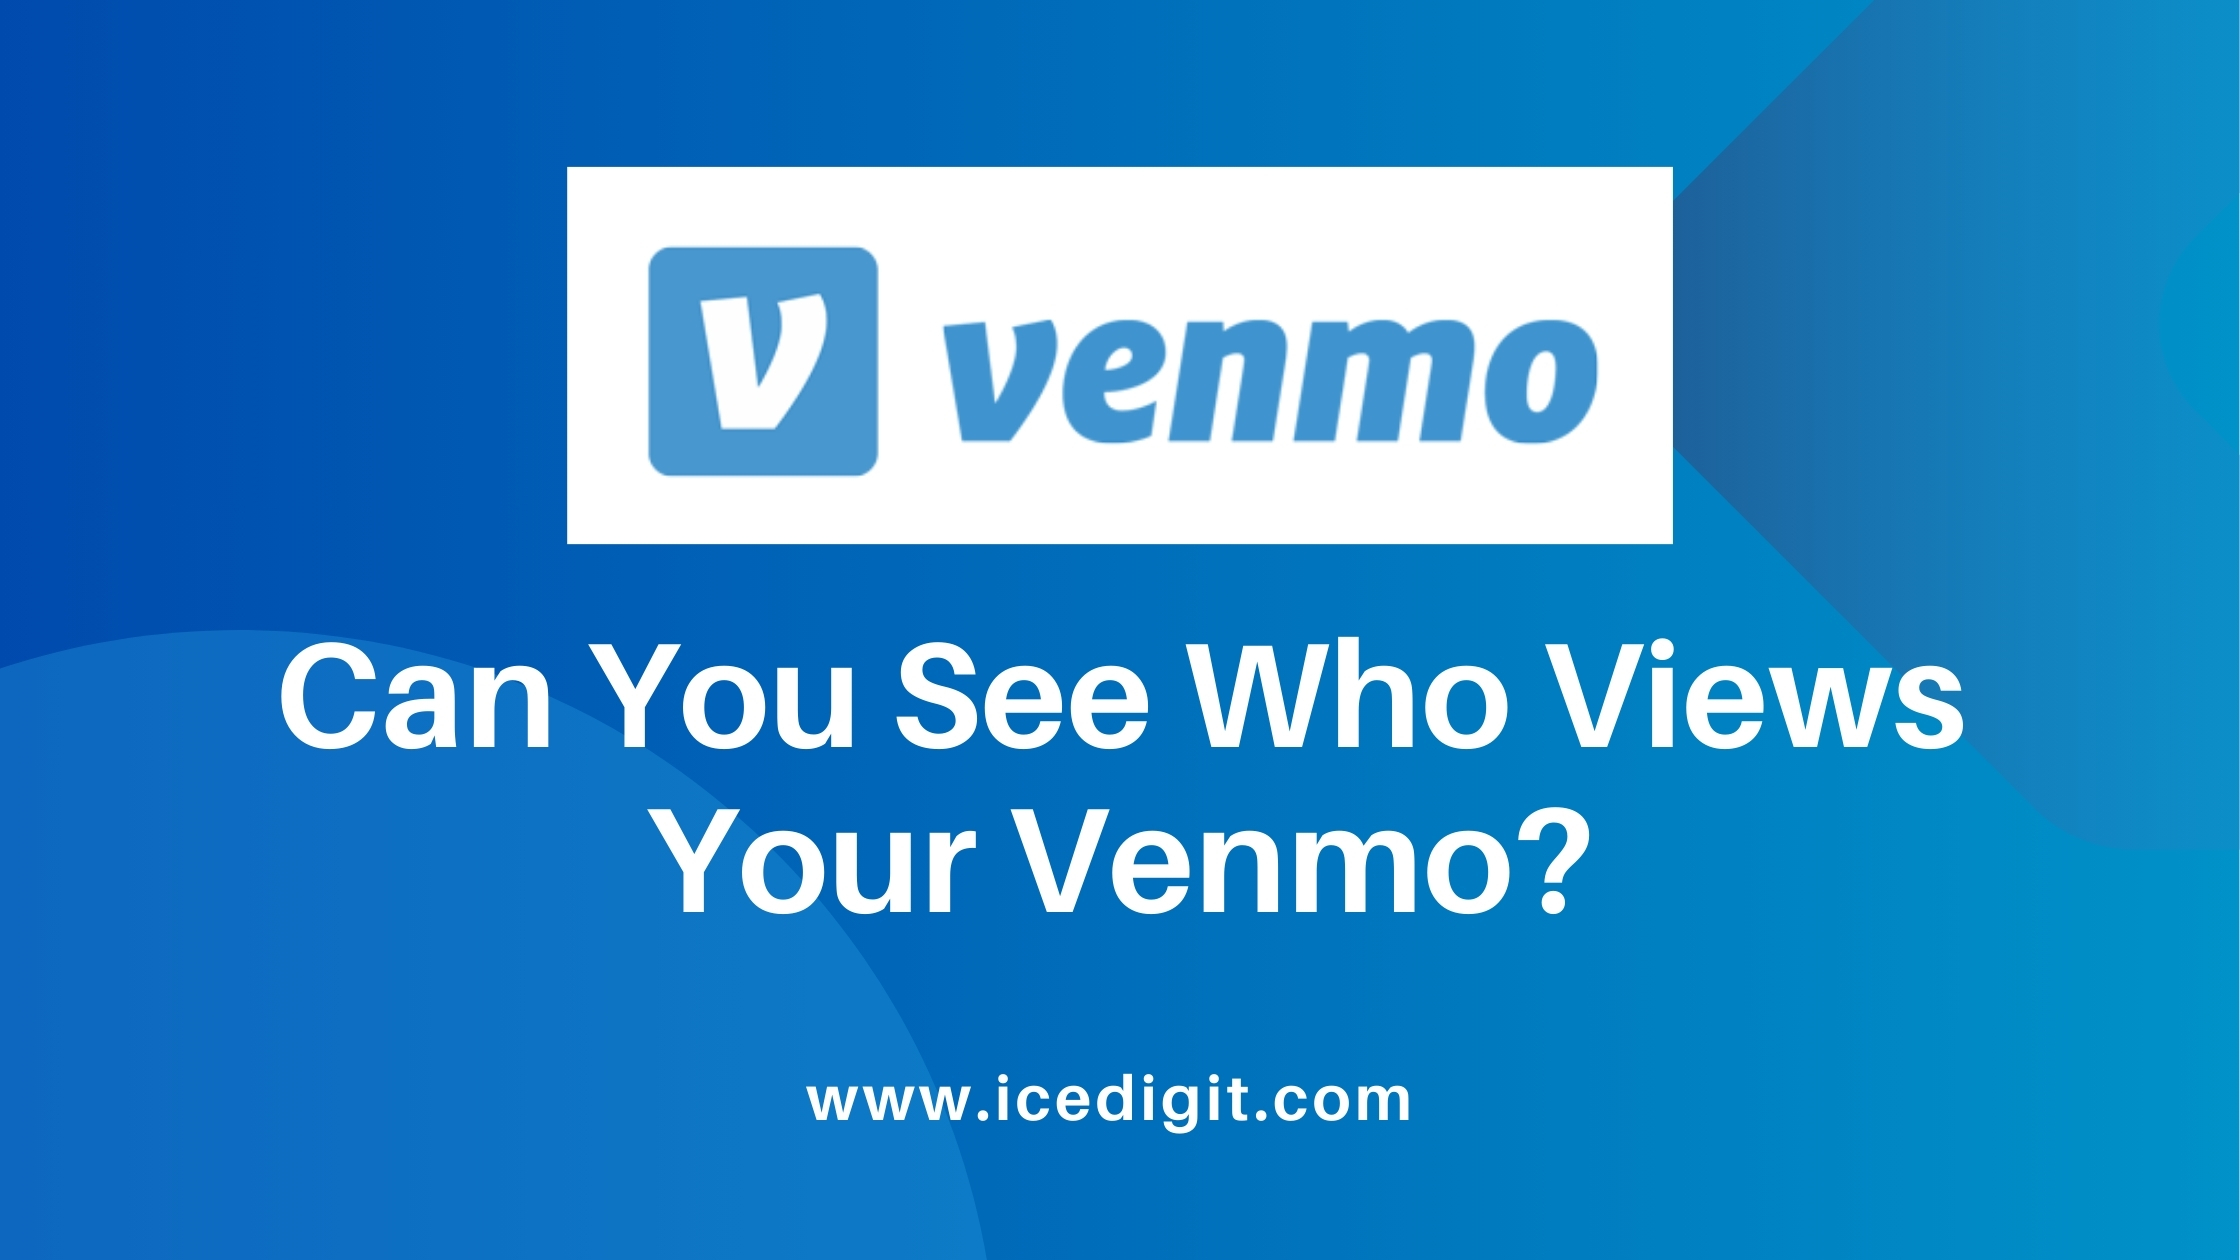 Can You See Who Views Your Venmo?